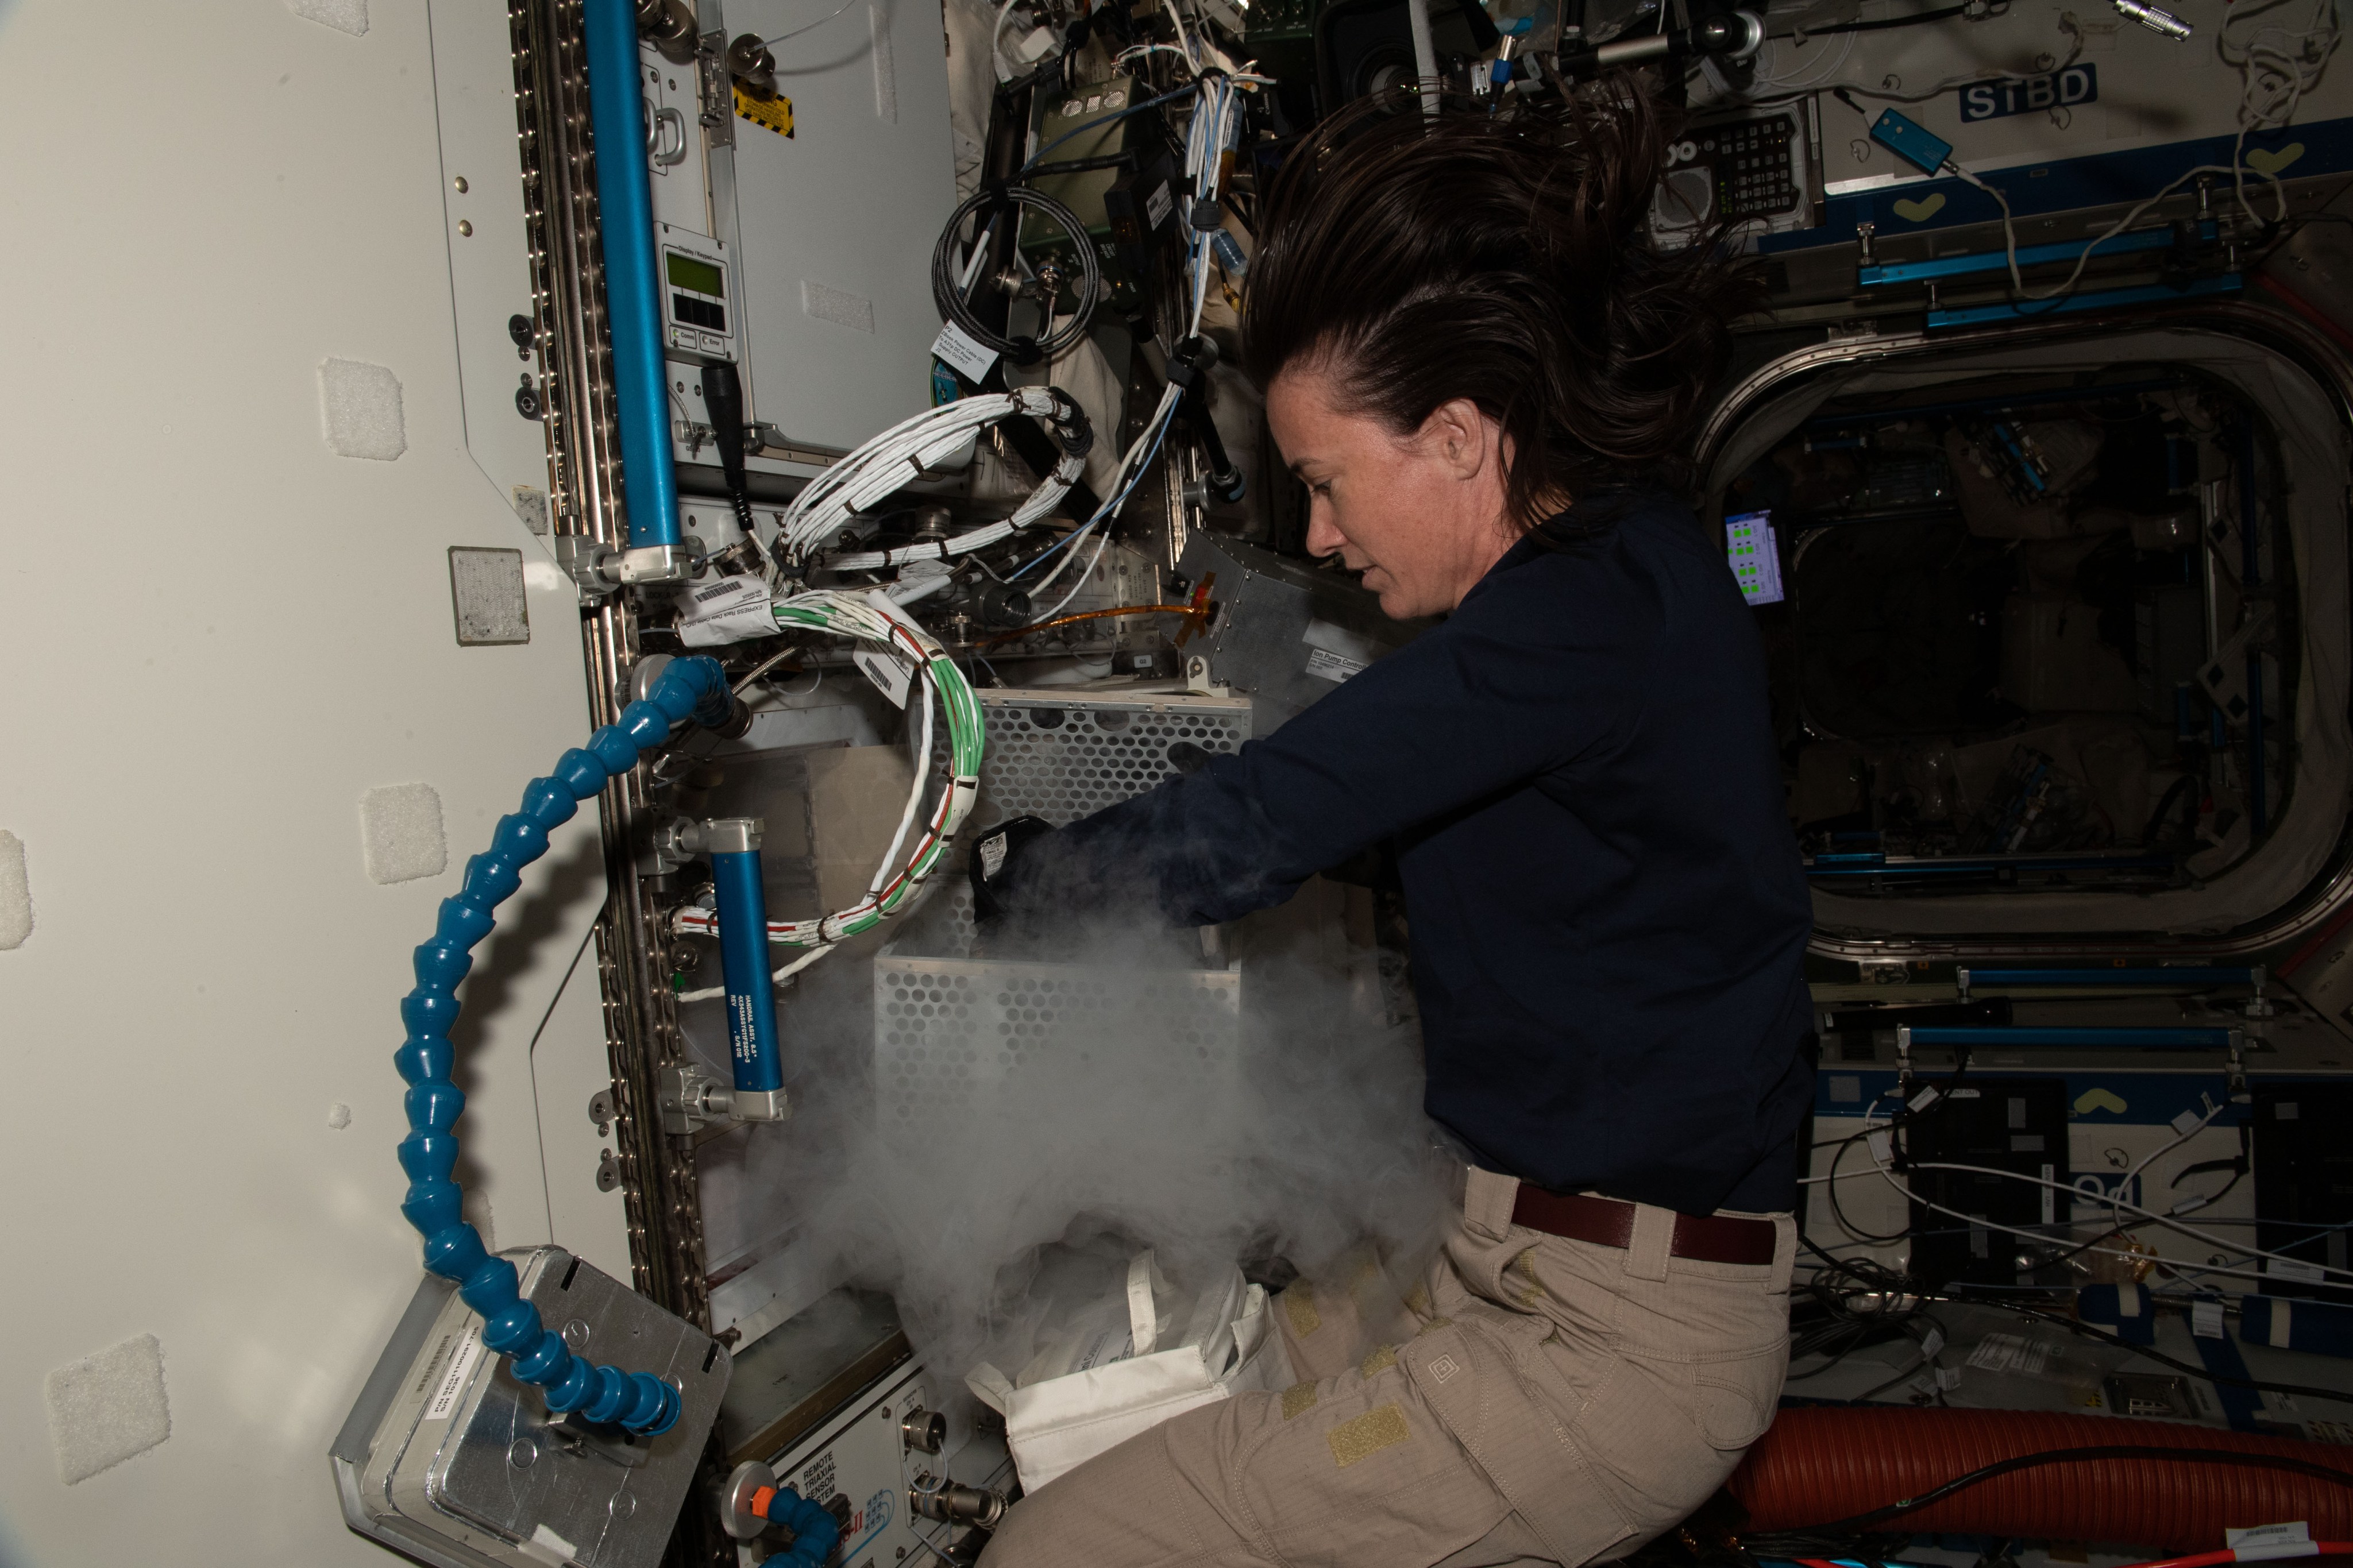 A woman donned in tan pants and a navy-blue top handles equipment on the International Space Station.